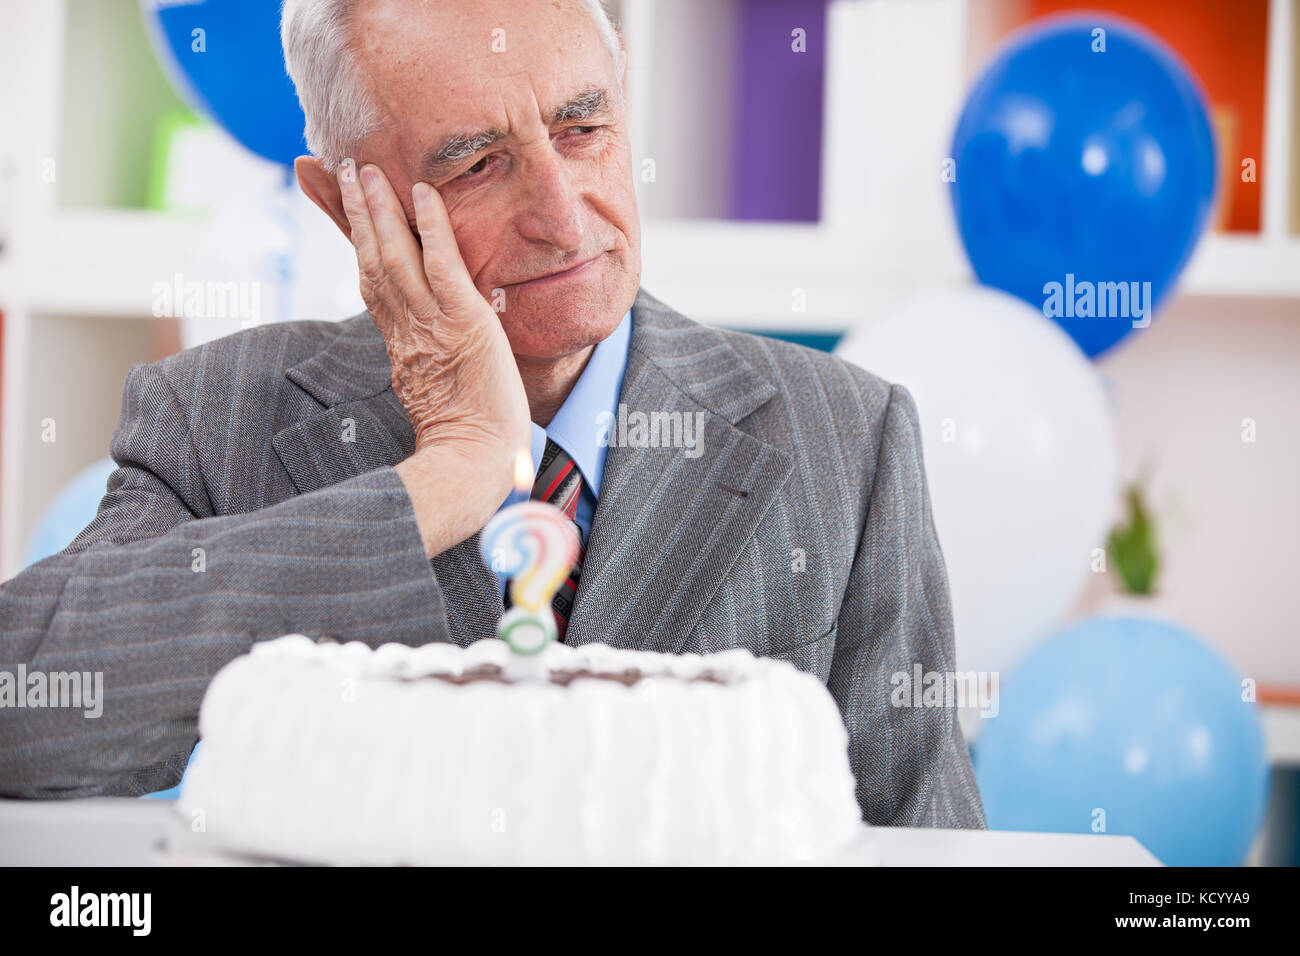 Sad senior man forgot how old is looking at birthday cake with a question mark Stock Photo